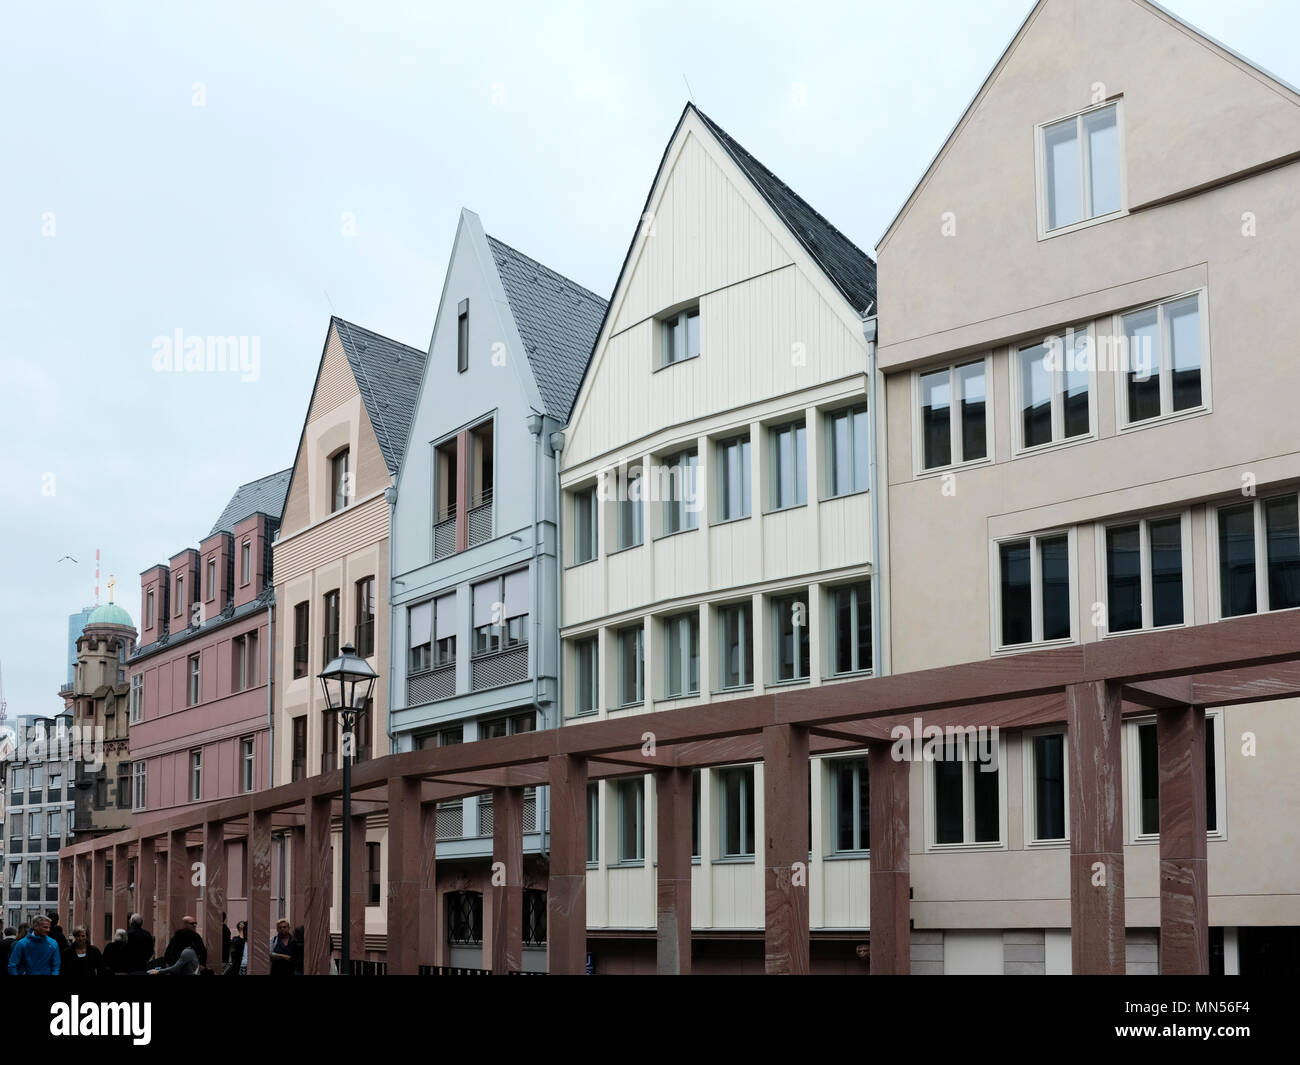 Housefronts in Neue Altstadt, Frankfurt am Main, Germany. The historical quarter is part of the former city centre (Altstadt), reconstructed in the so Stock Photo